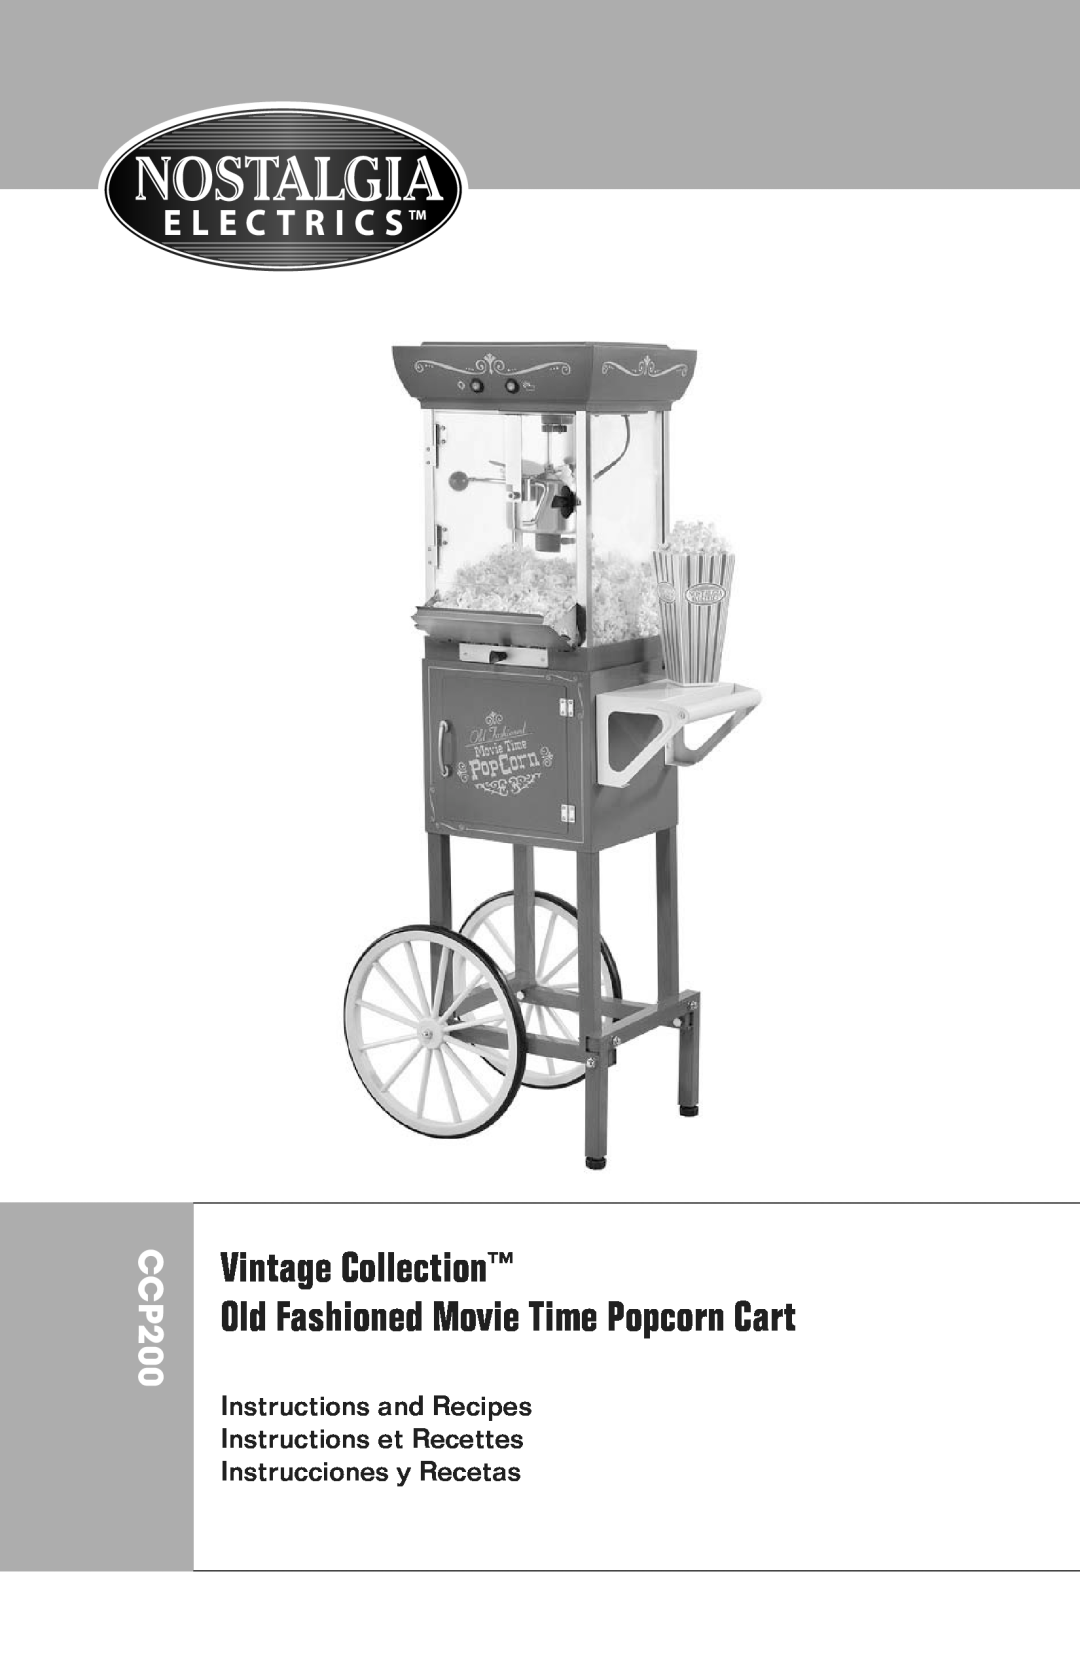 Nostalgia Electrics CCP200 manual Vintage Collection Old Fashioned Movie Time Popcorn Cart 